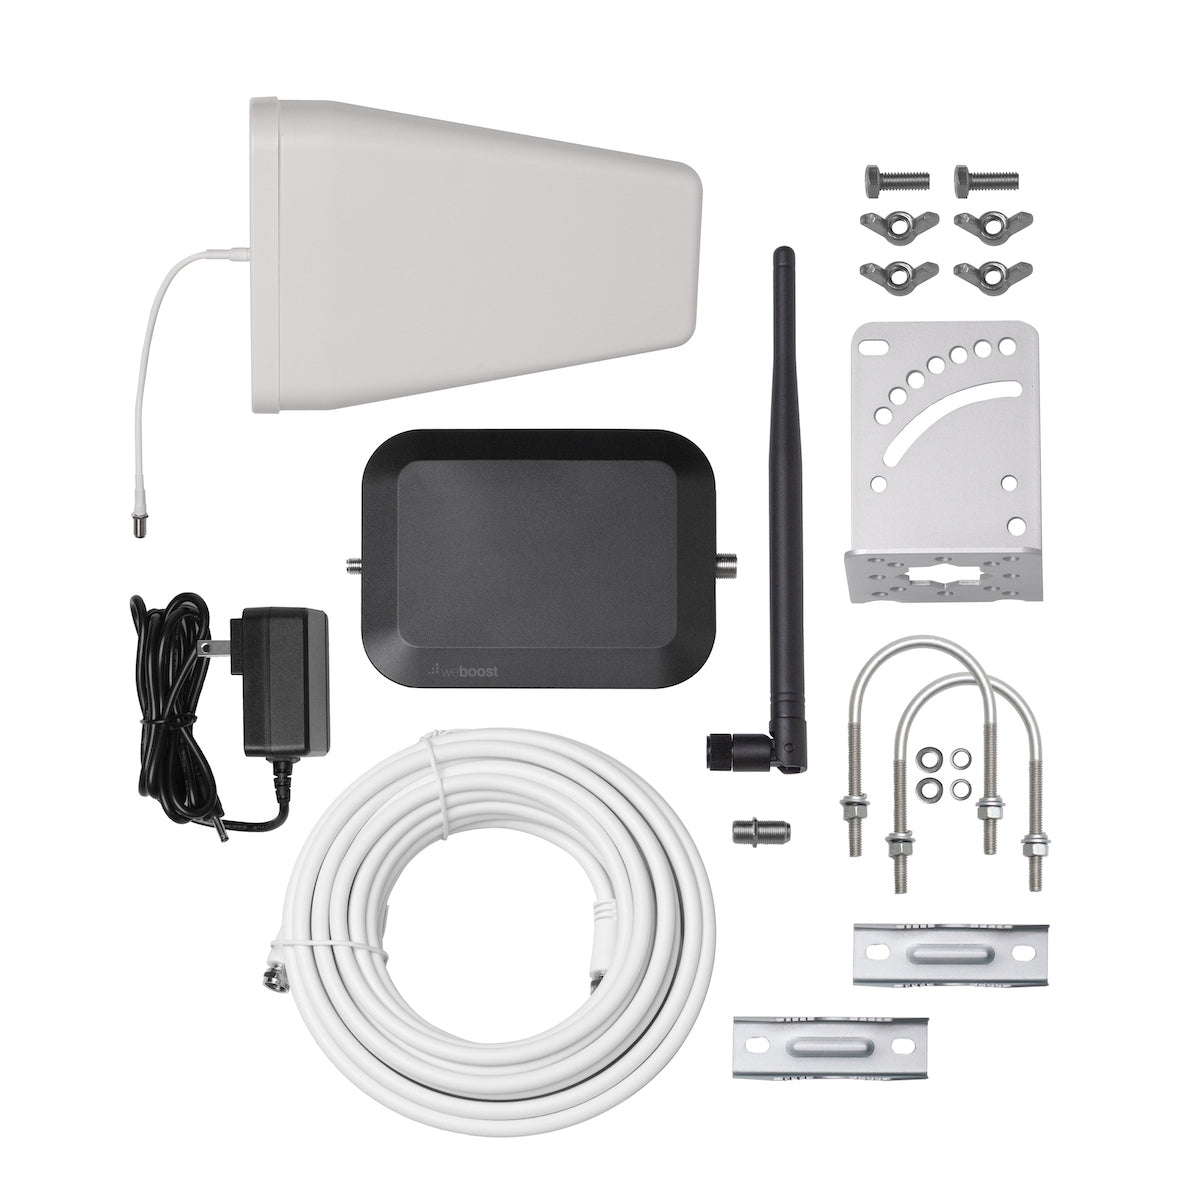 weBoost Home Studio Signal Booster Kit | 470166 - Kit Contents